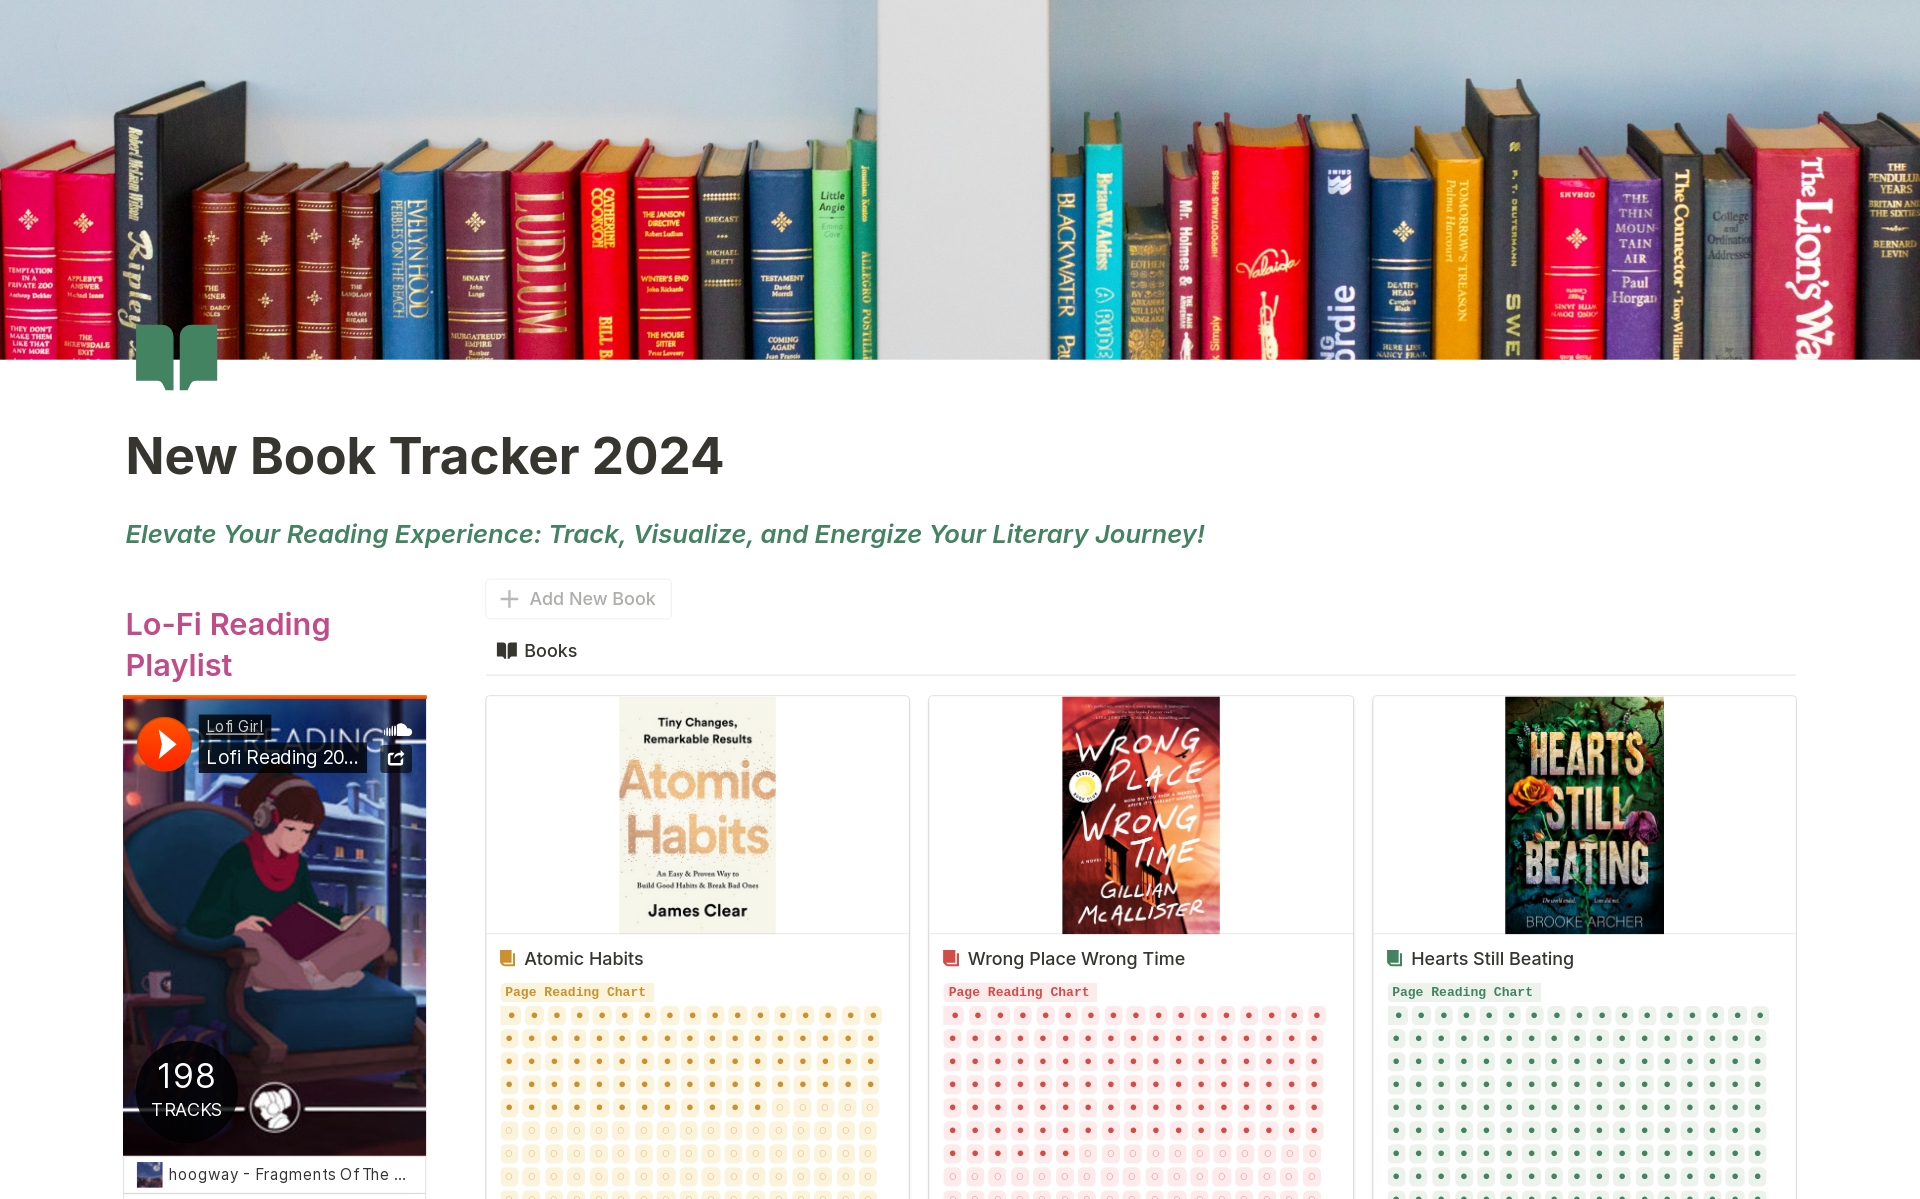 New Book Tracker 2024: Dive Deeper into Your Reading Journey

Craft a mindful and productive reading experience with the New Book Tracker 2024 for Notion!

This innovative template goes beyond simply listing books.